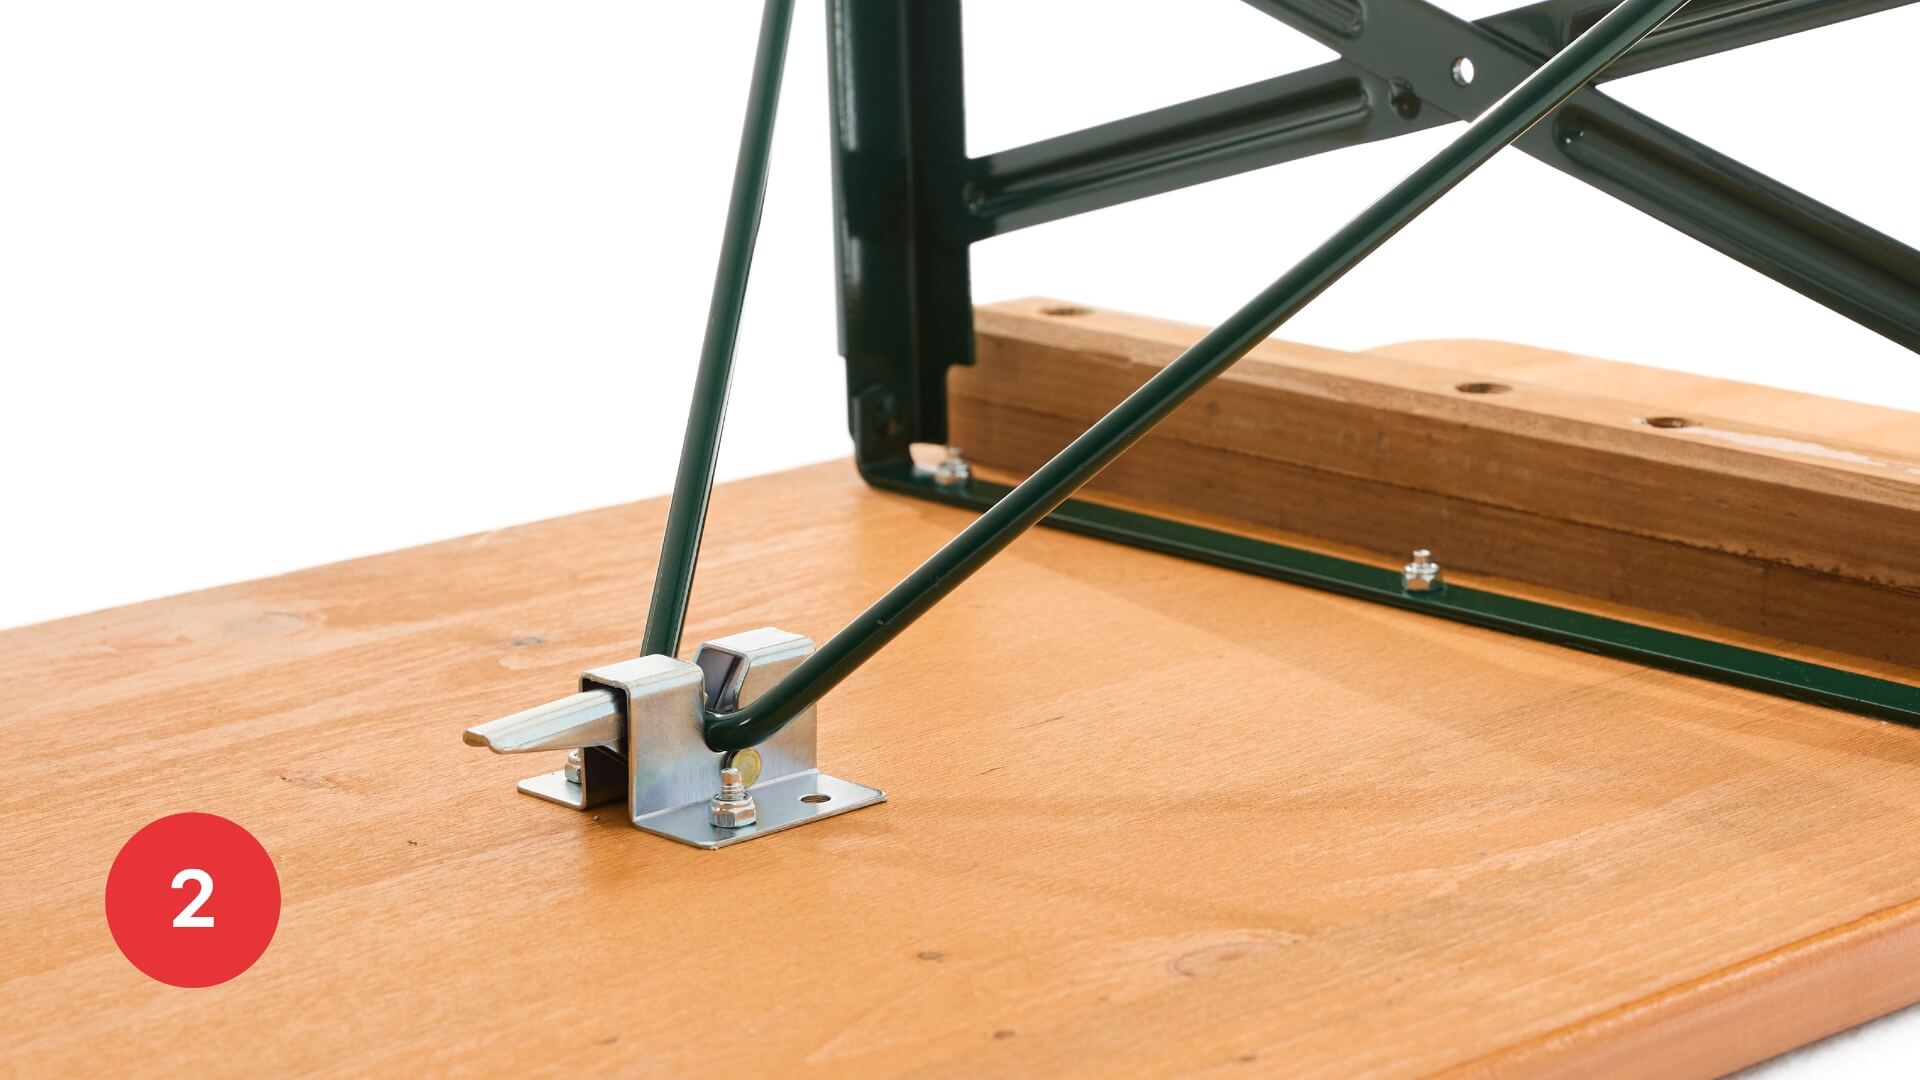 Folding furniture lock for the stability of the base